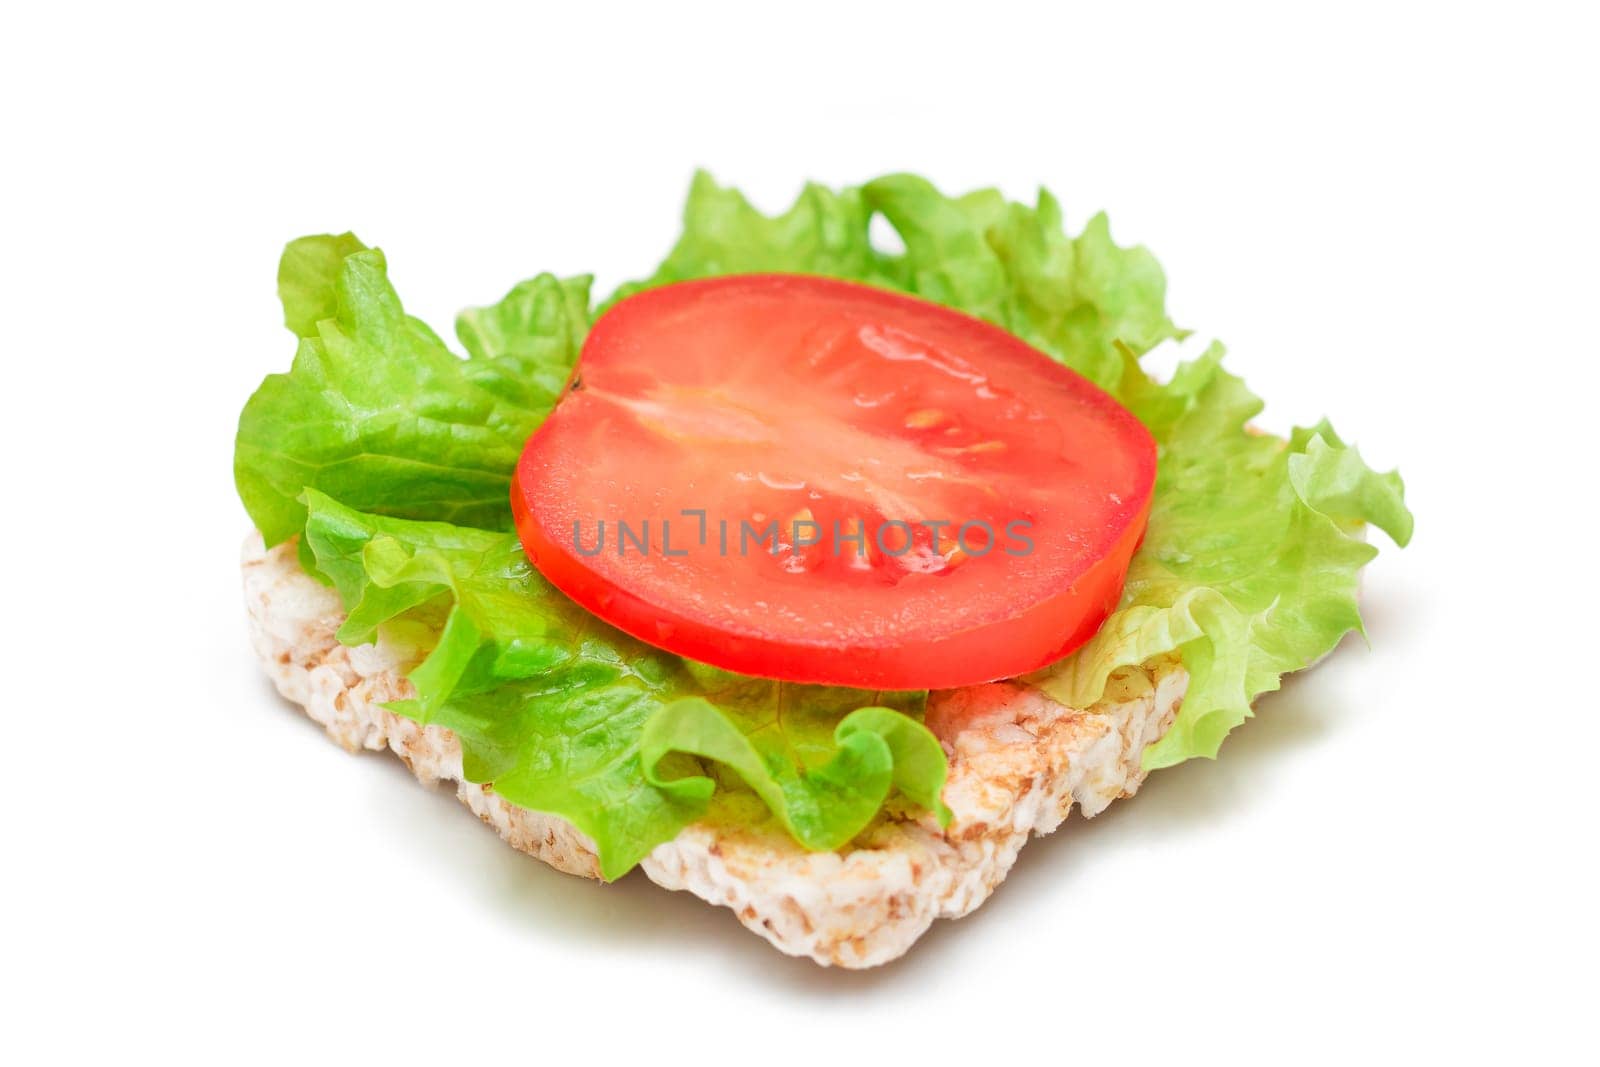 Rice Cake Sandwich with Tomato and Lettuce - Isolated by InfinitumProdux